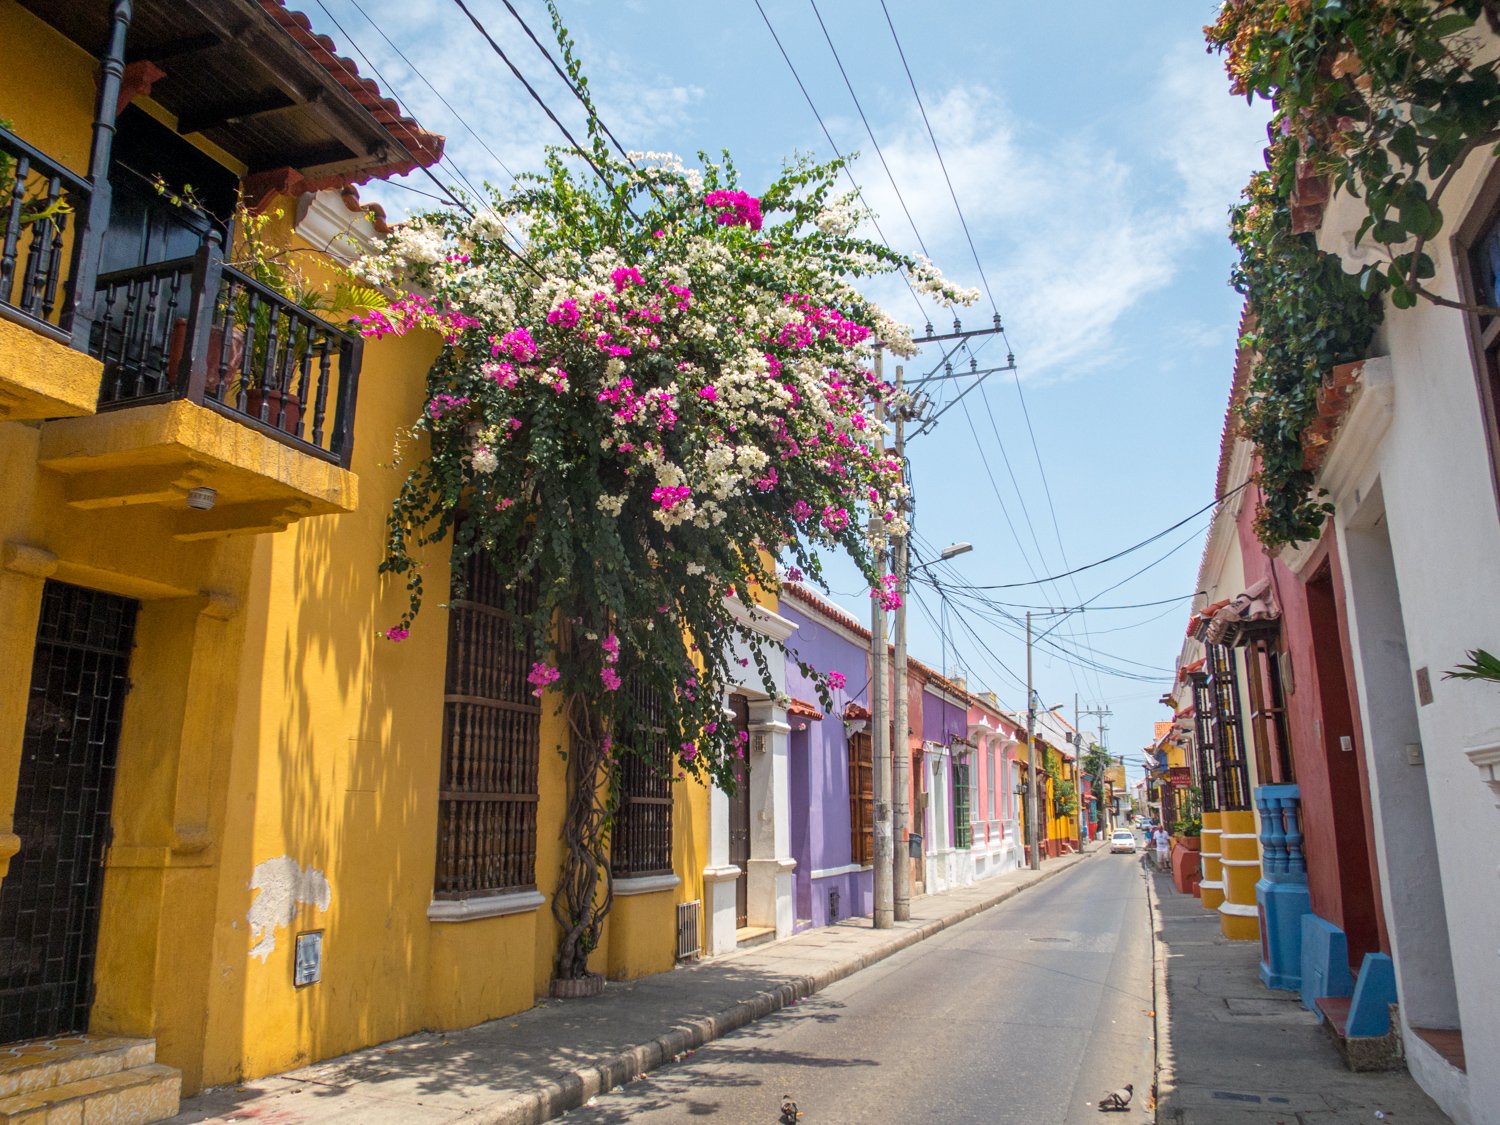 Walking the colorful streets in the Old Town is one of the top things to do in Cartagena, Colombia